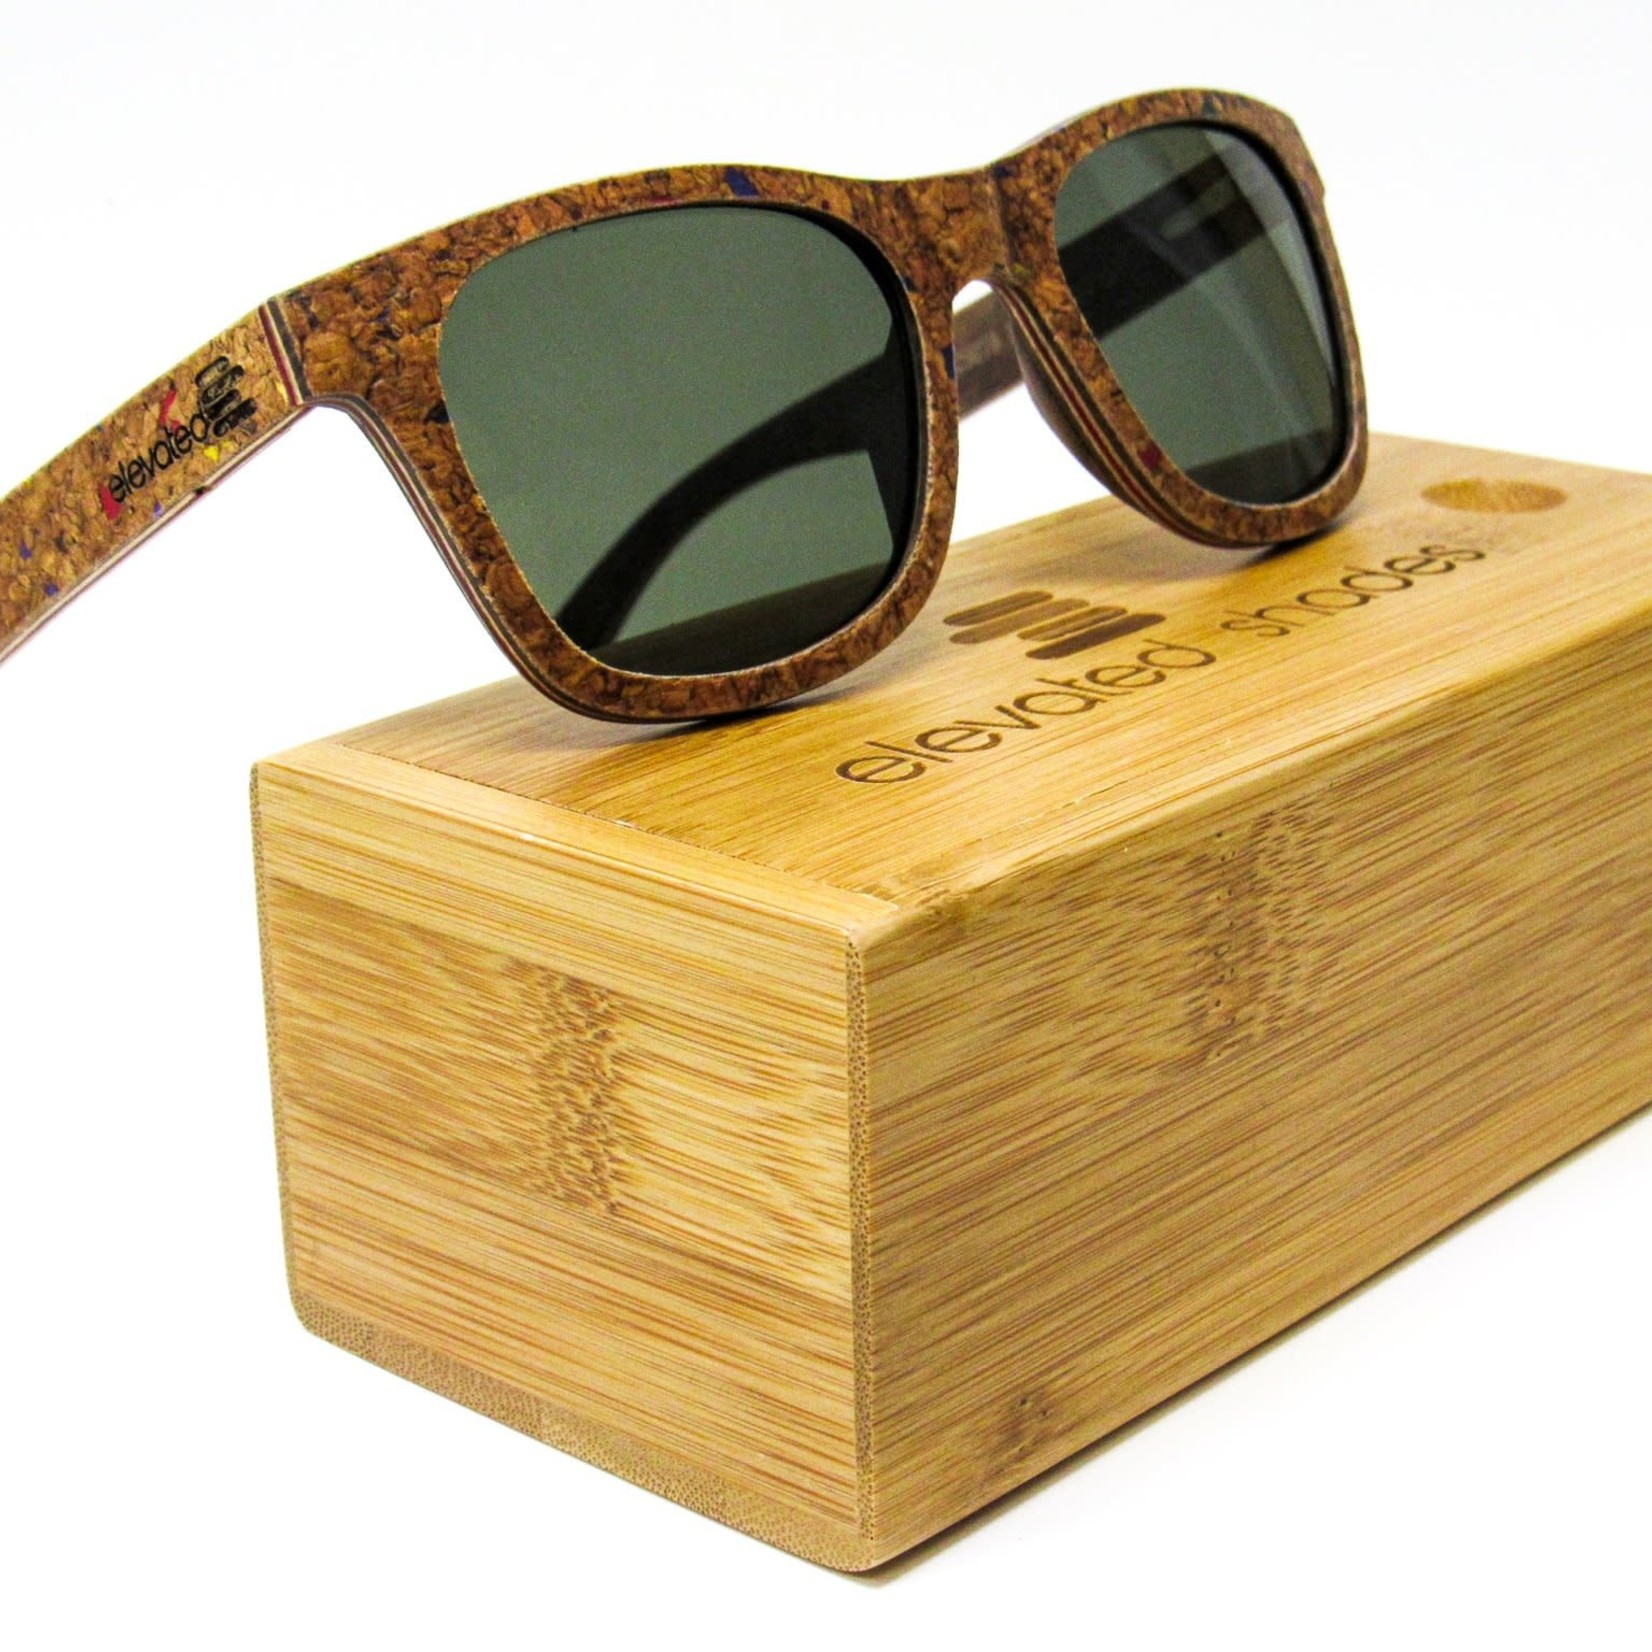 Elevated Shades The "Corked" with Polarized Black Lenses